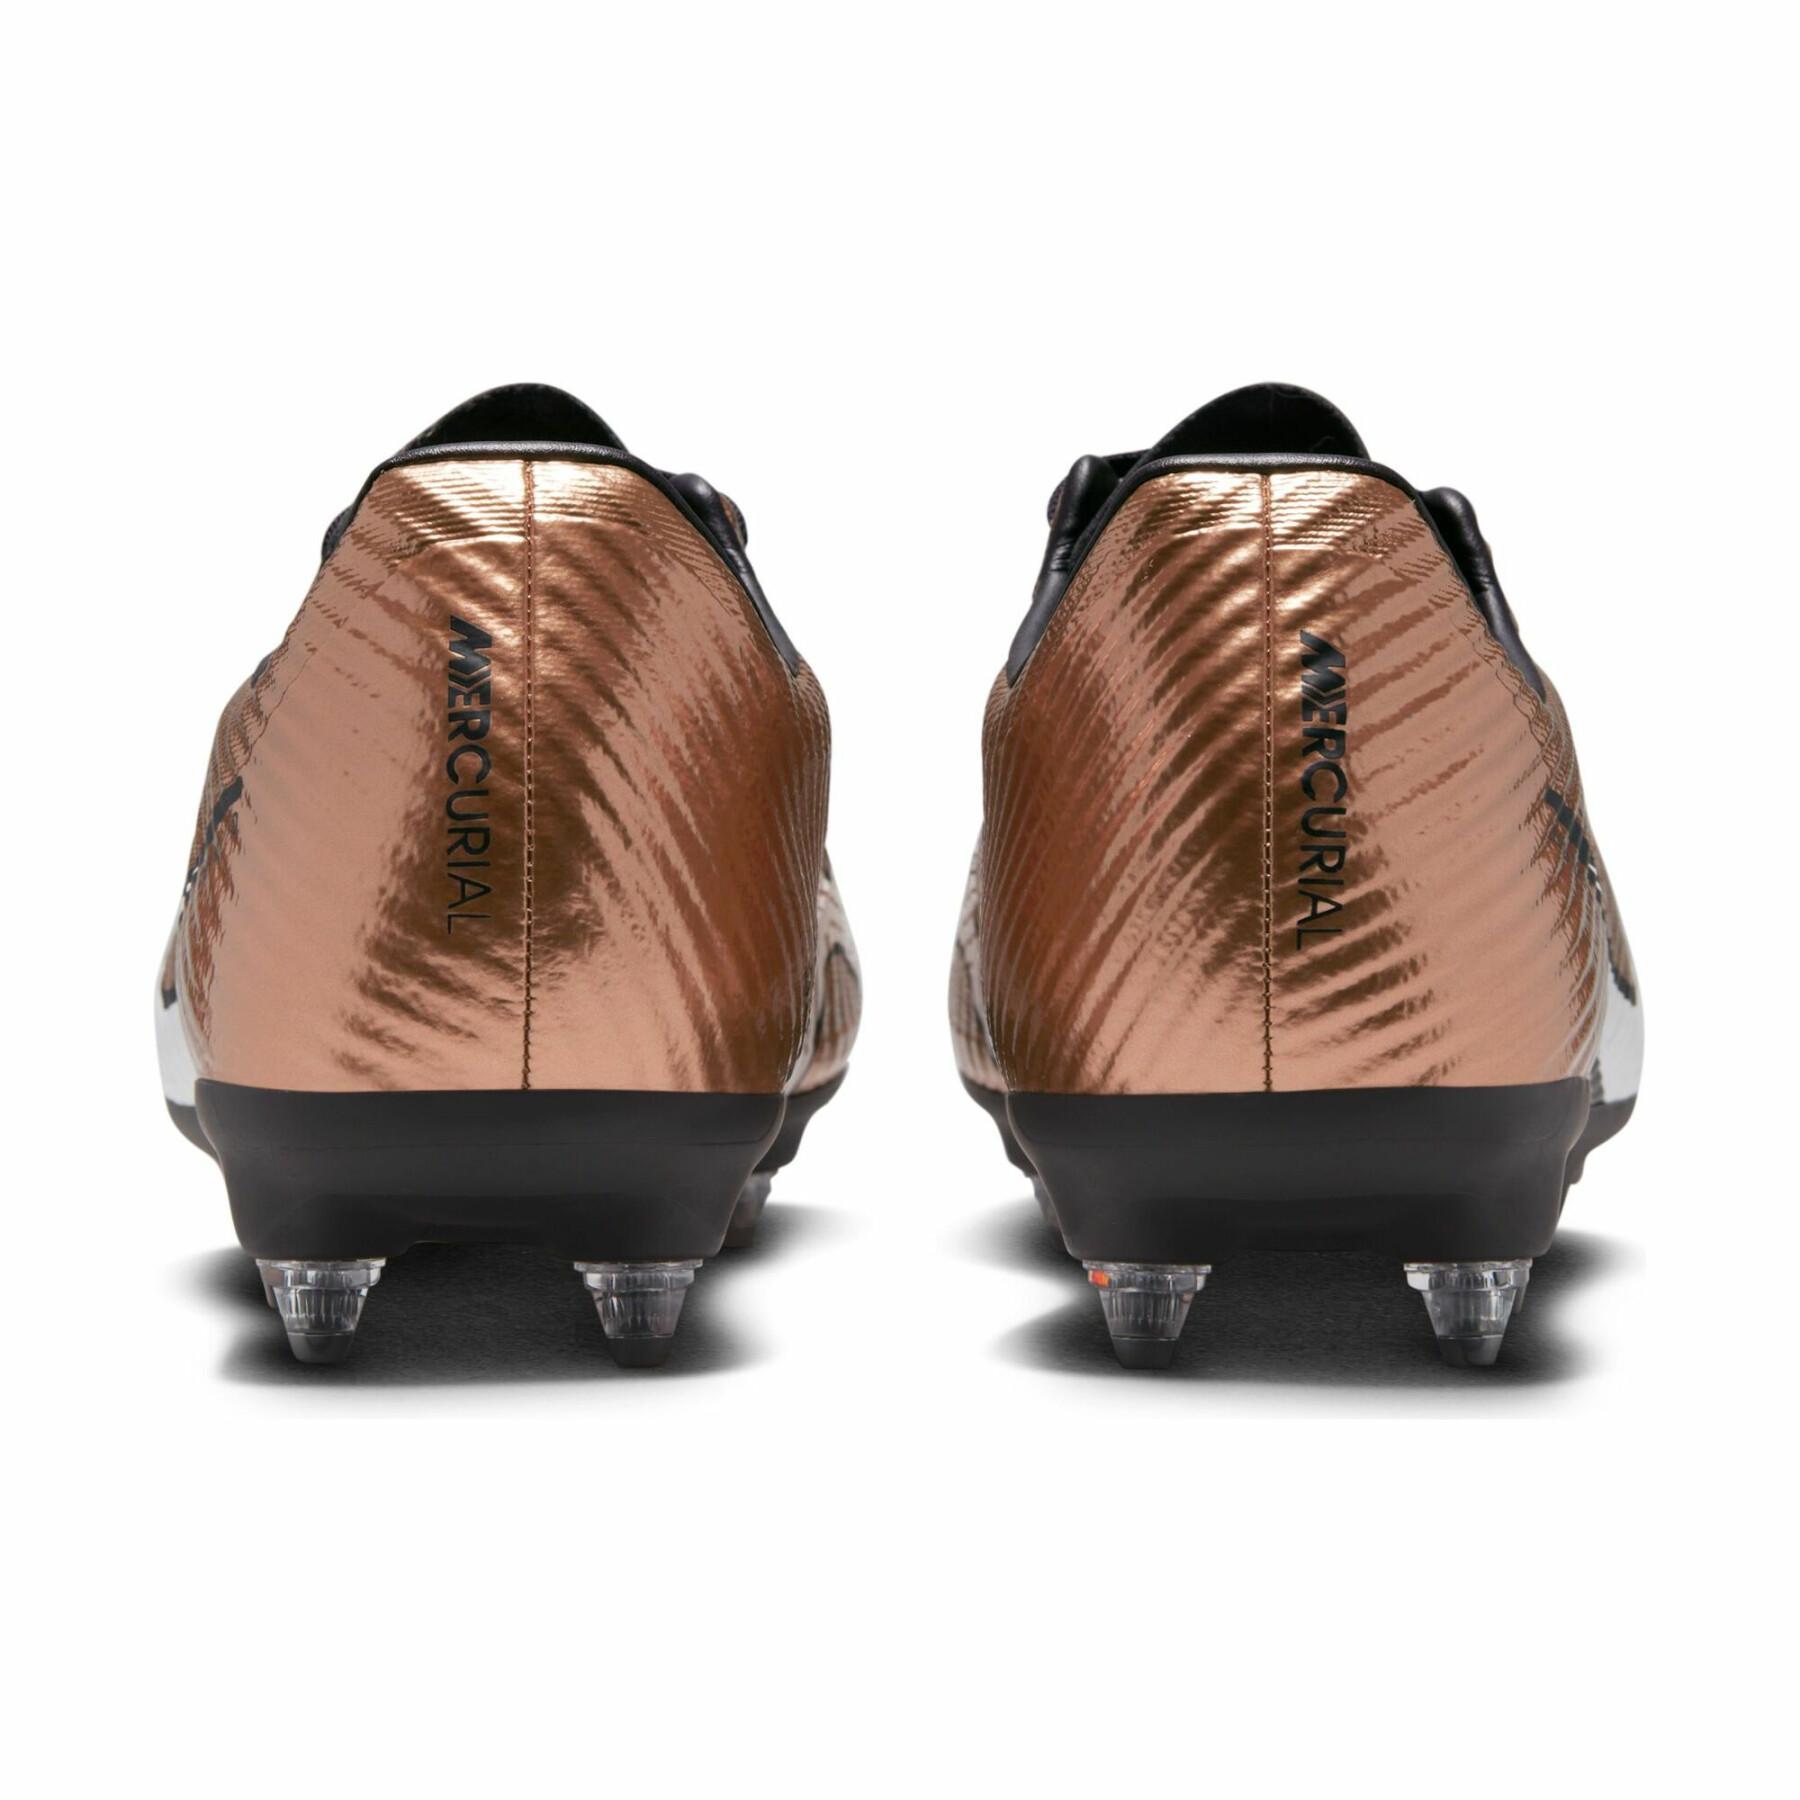 Chaussures de football Nike Zoom Mercurial Vapor 15 Academy SG-Pro Anti-Clog Traction - Generation Pack